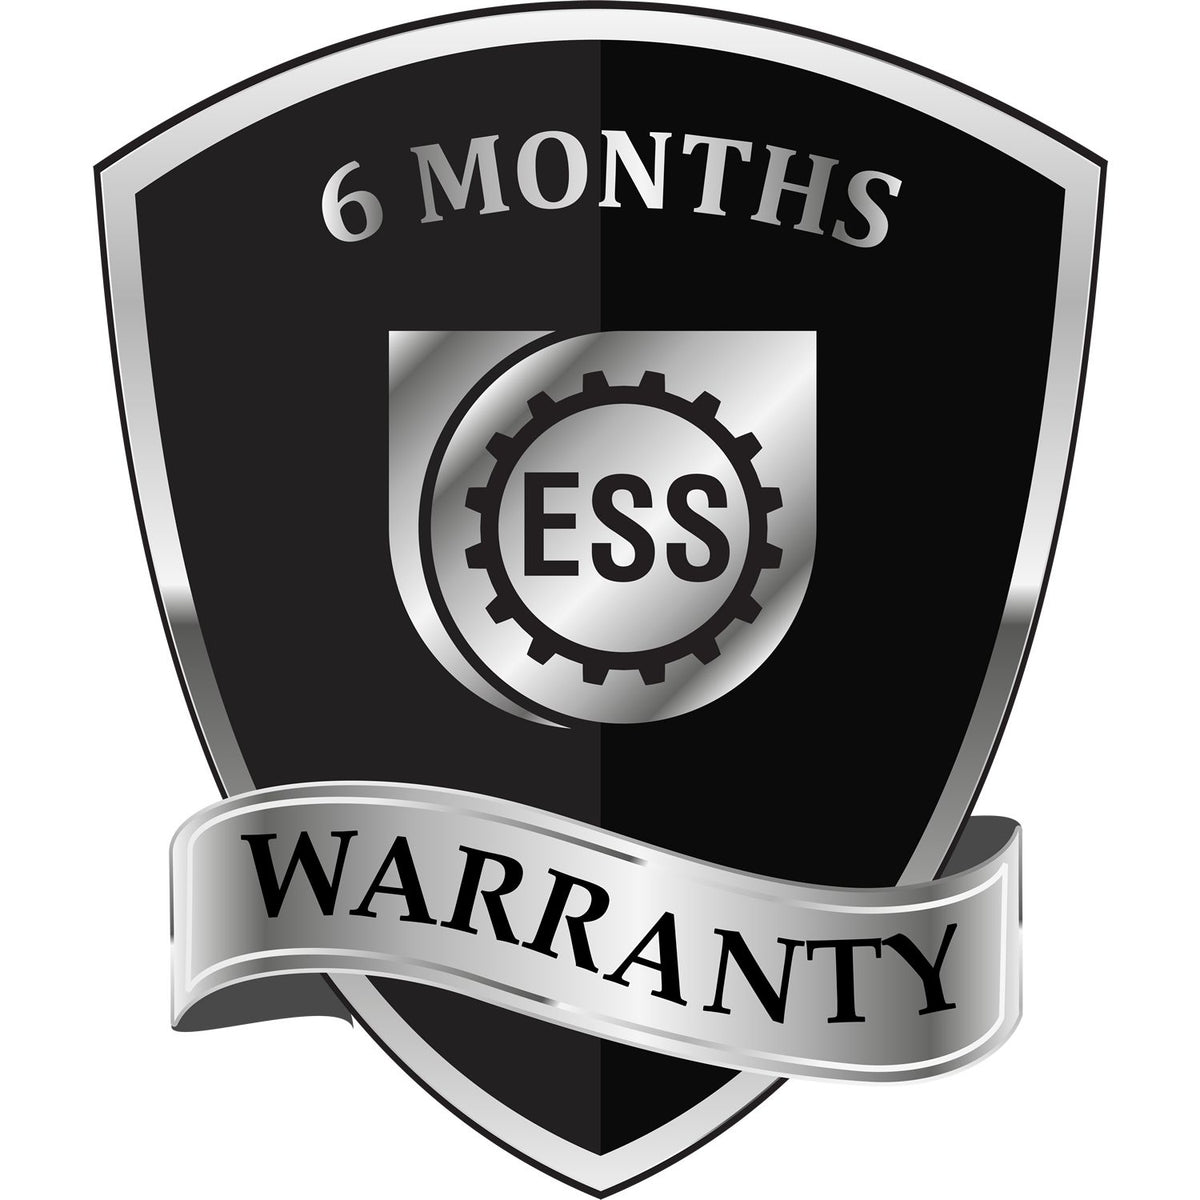 A badge or emblem showing a warranty icon for the PSI Arkansas Notary Stamp